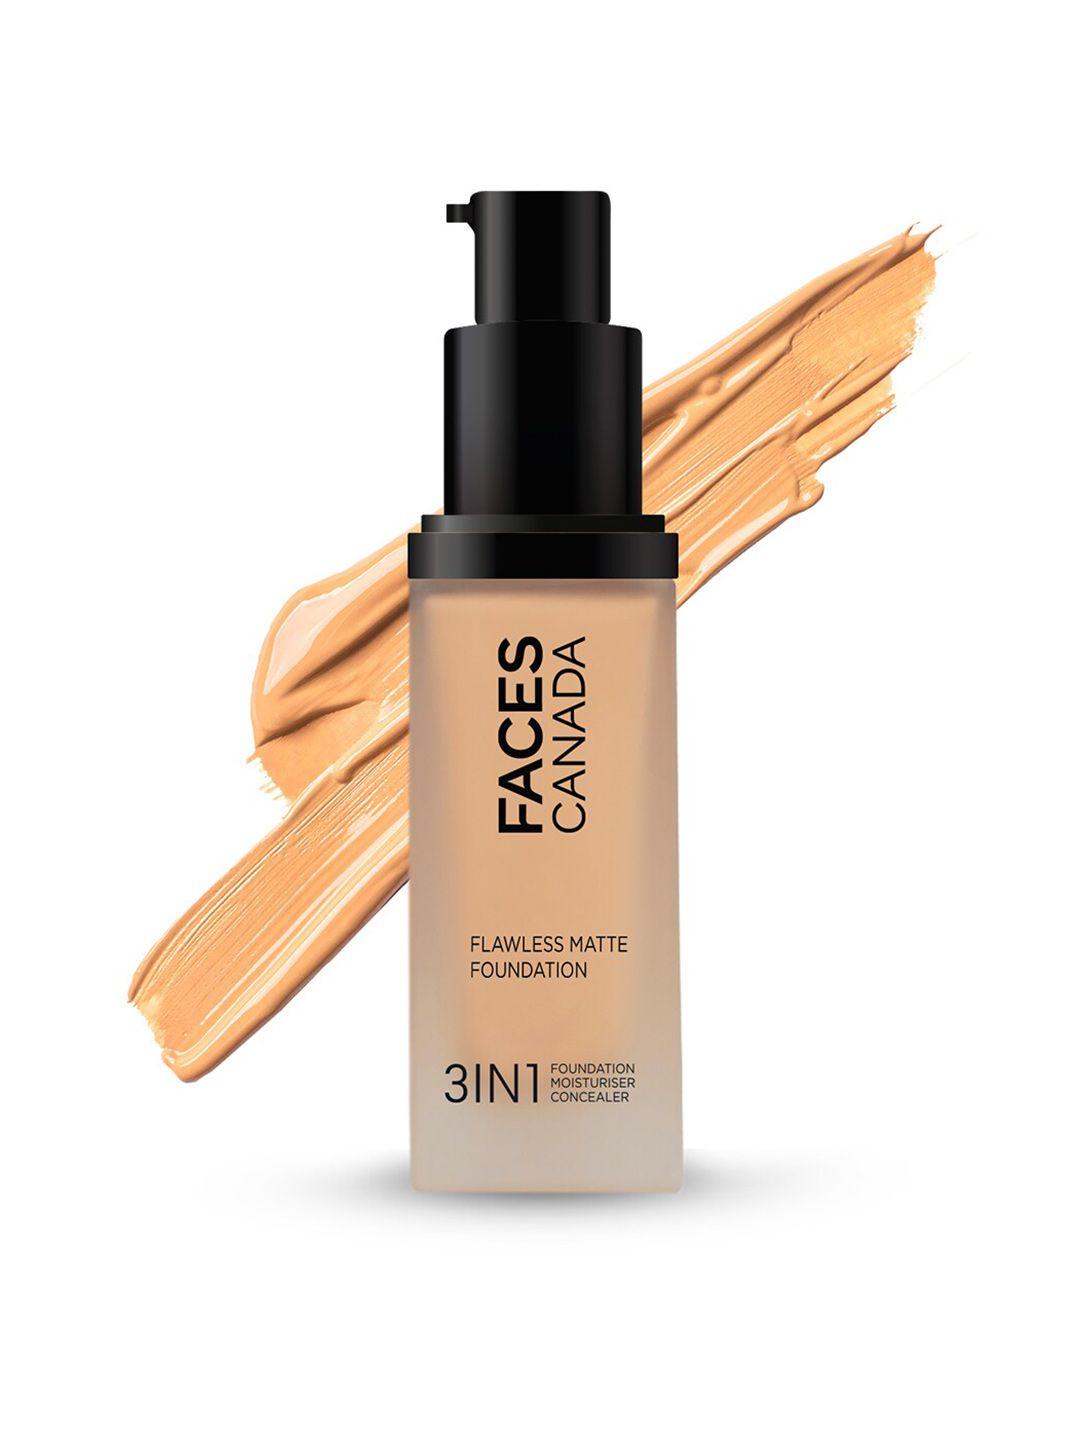 faces-canada-3-in-1-flawless-matte-foundation---30ml---golden-beige-032